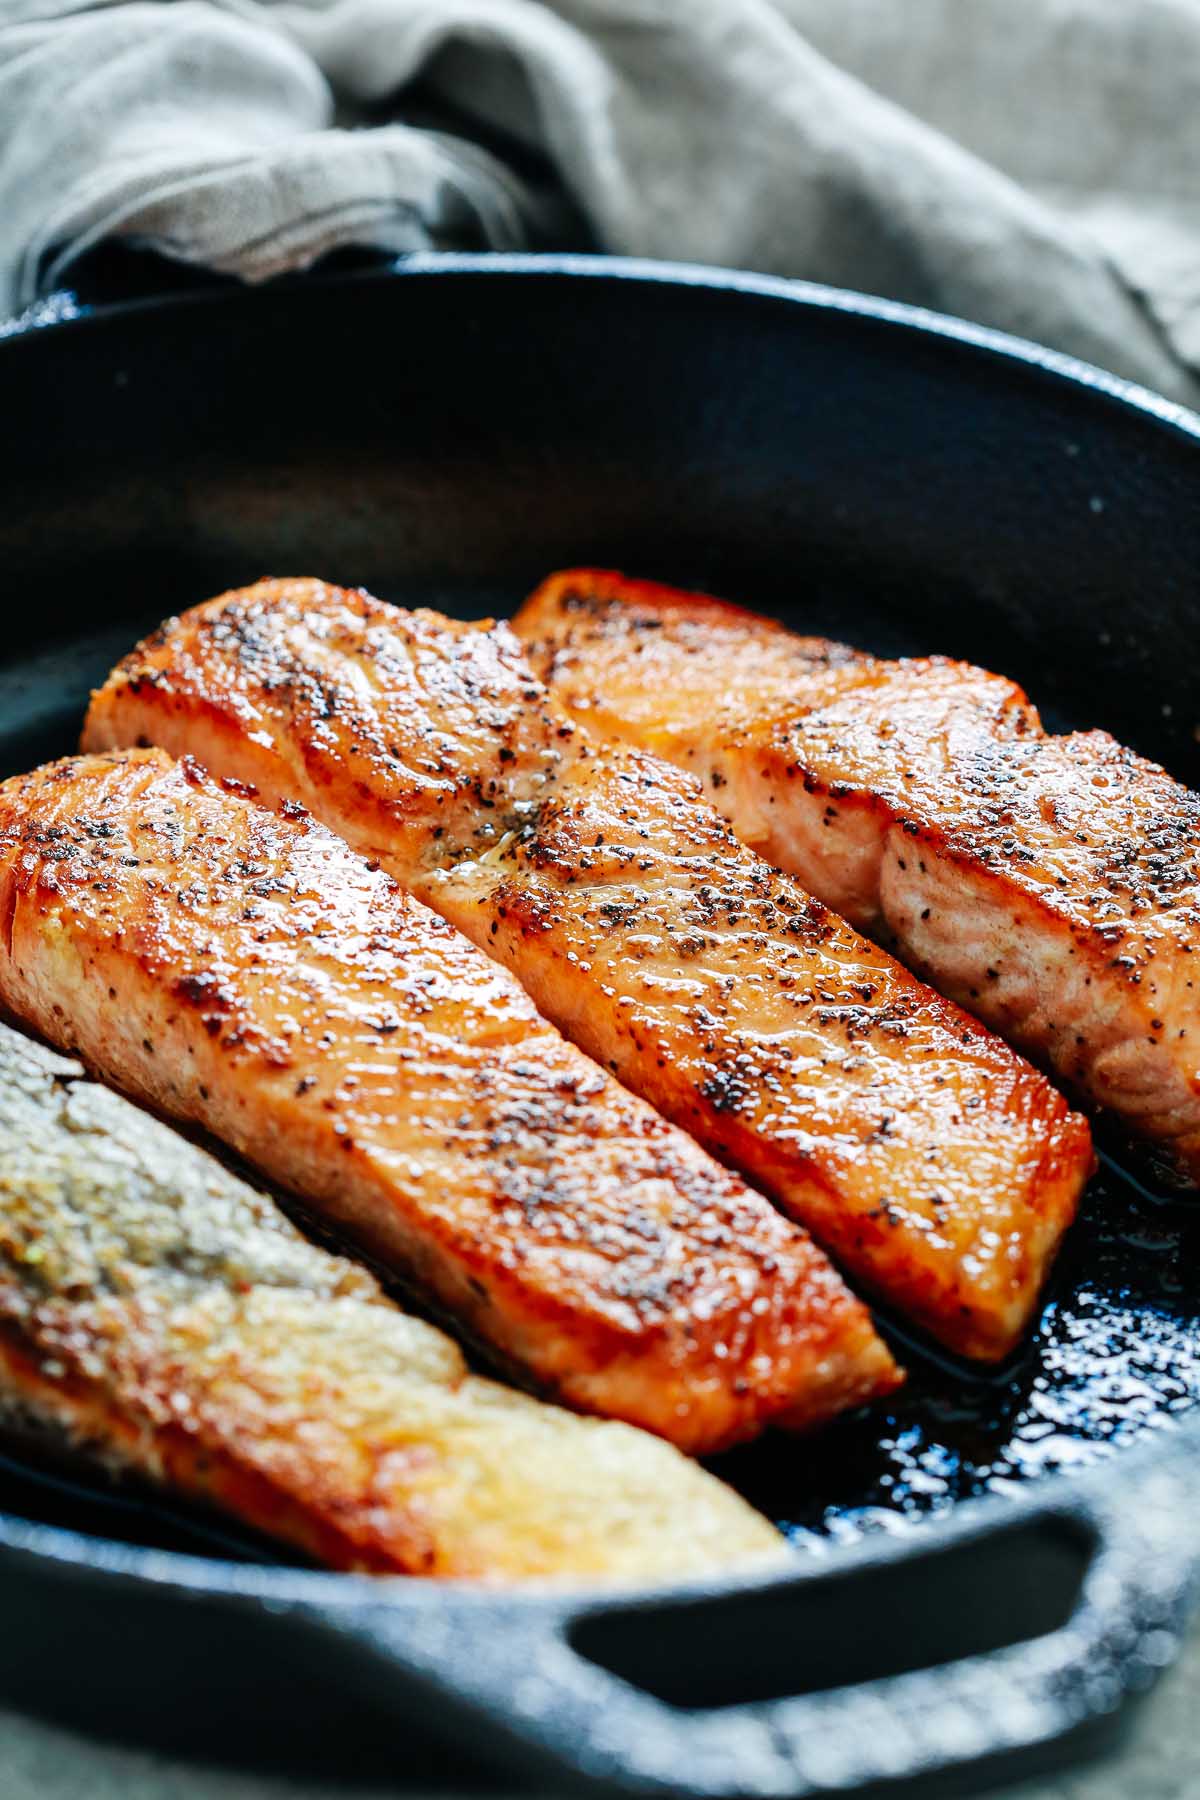 4 pan seared salmon fillets in a cast iron skillet